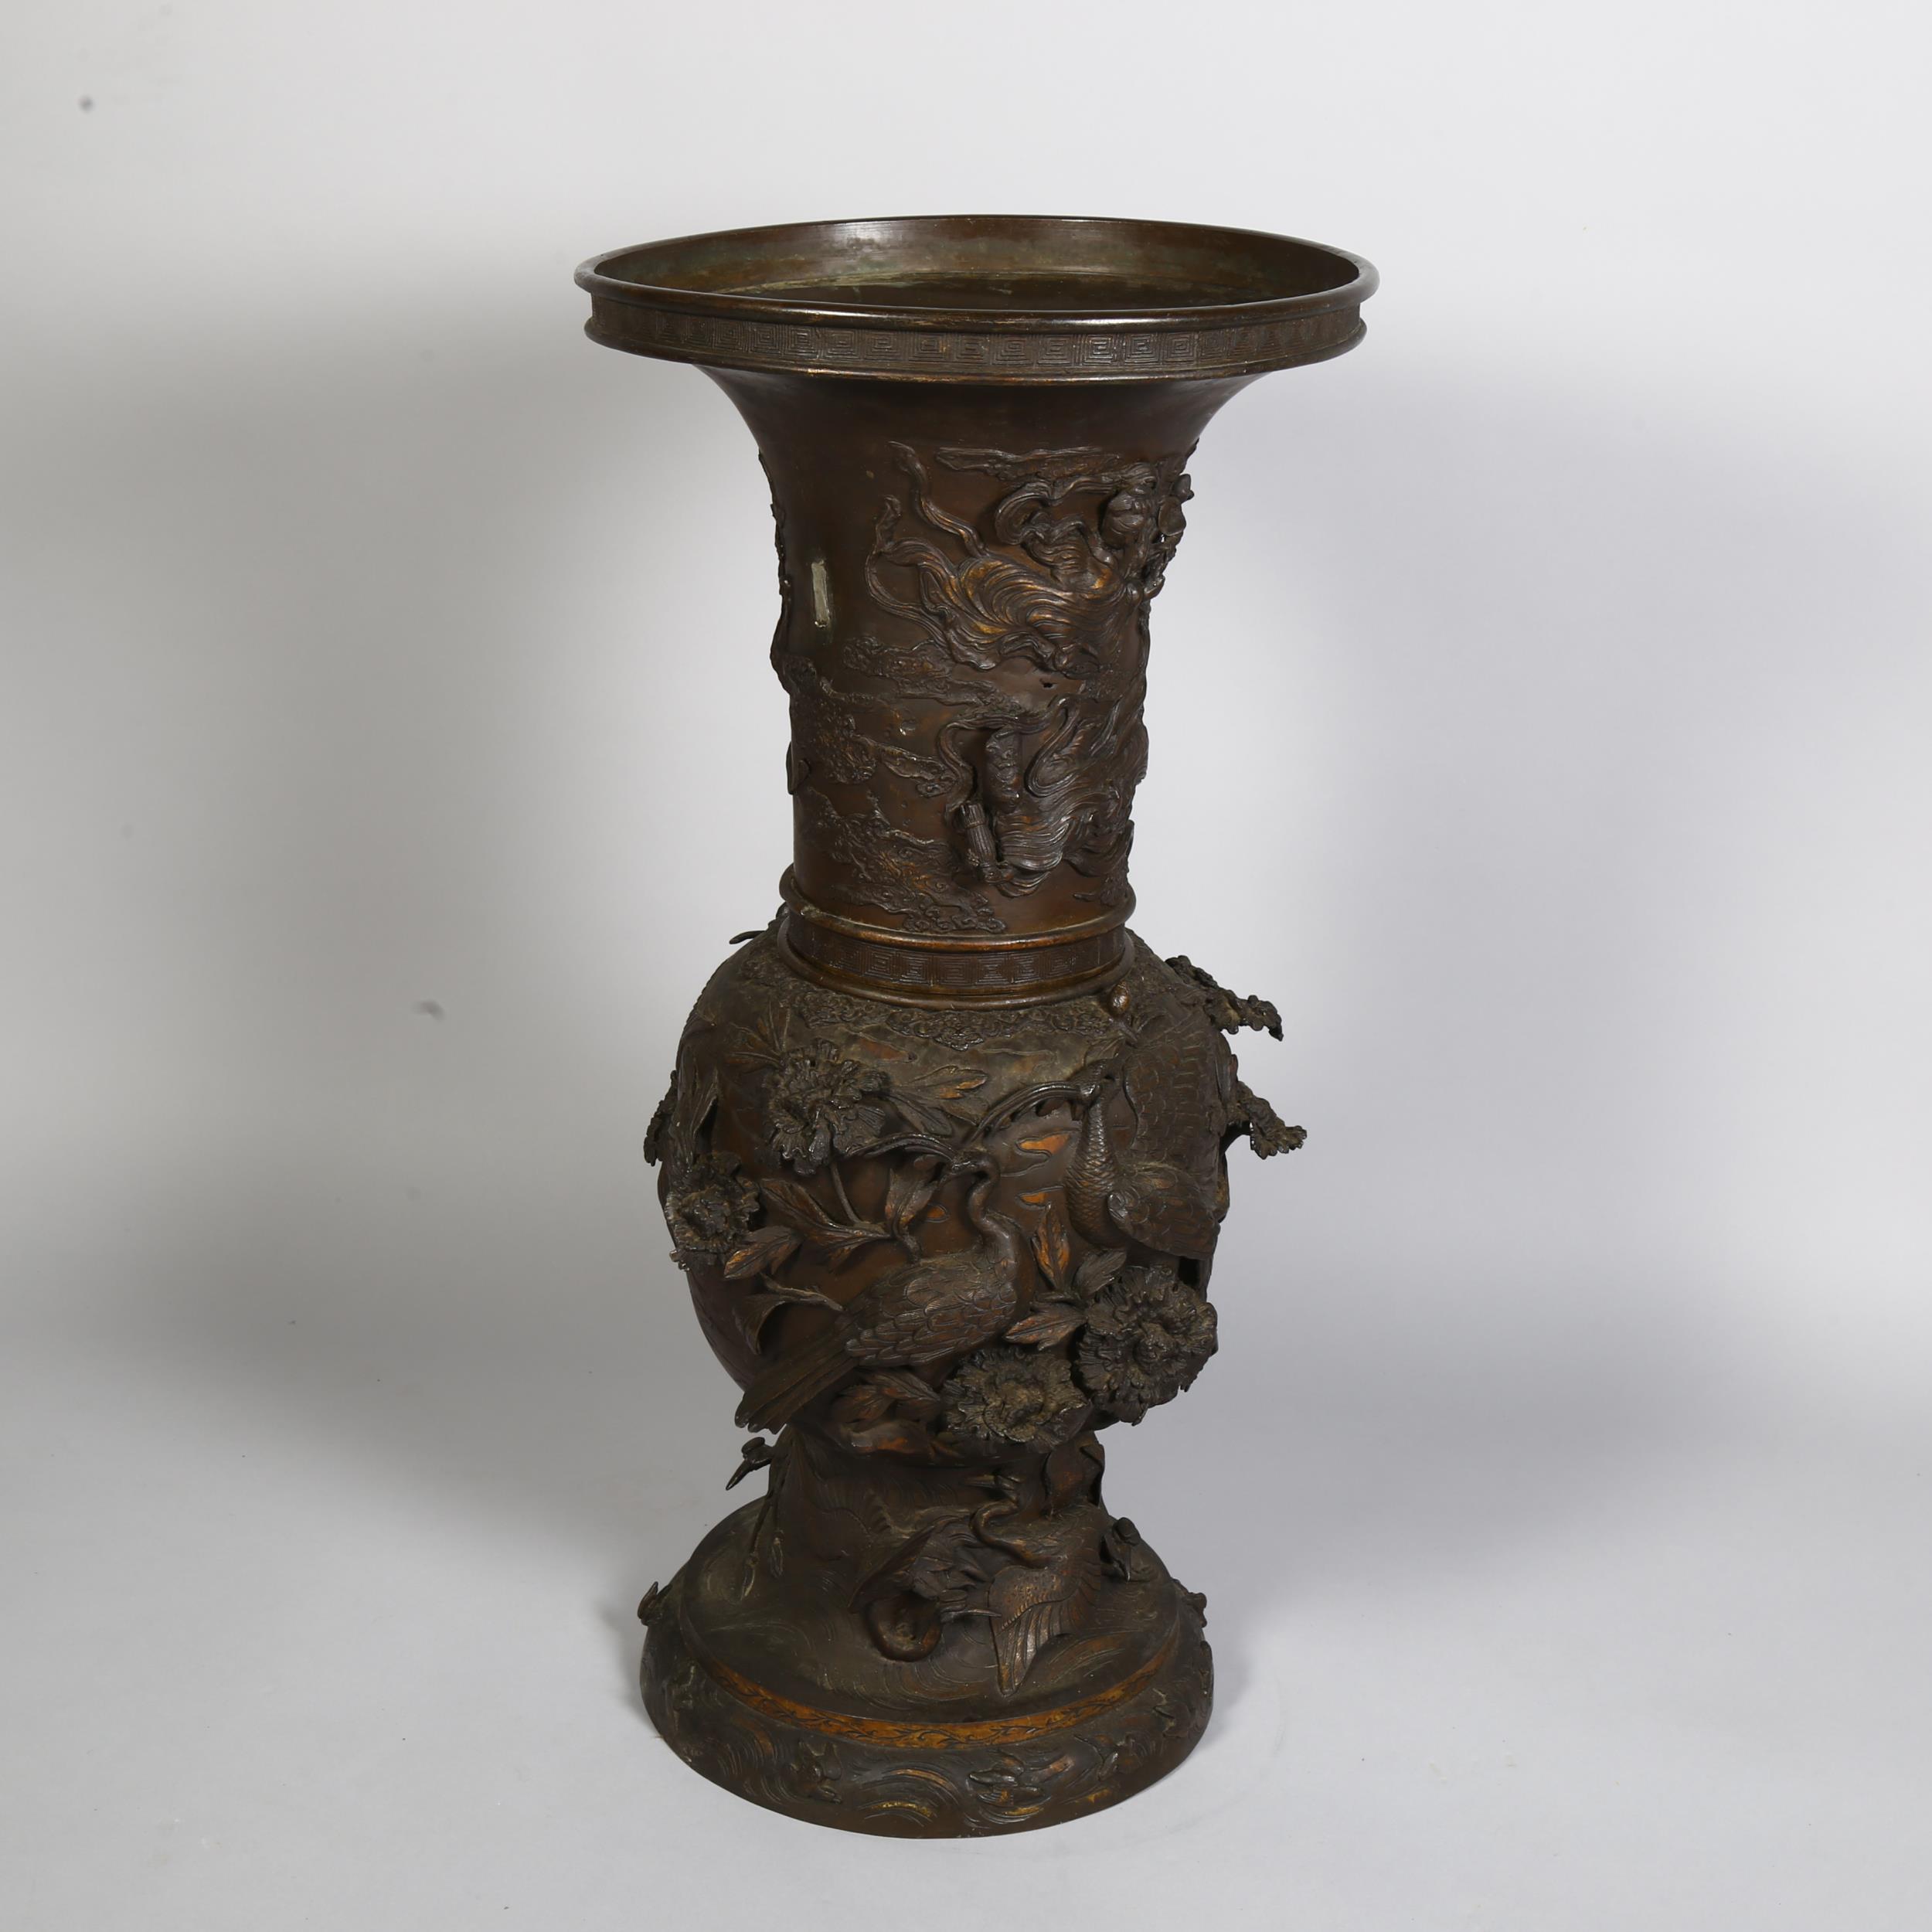 An Antique Chinese large cast-bronze vase in 2 sections, with birds and plants in high relief, - Image 2 of 3